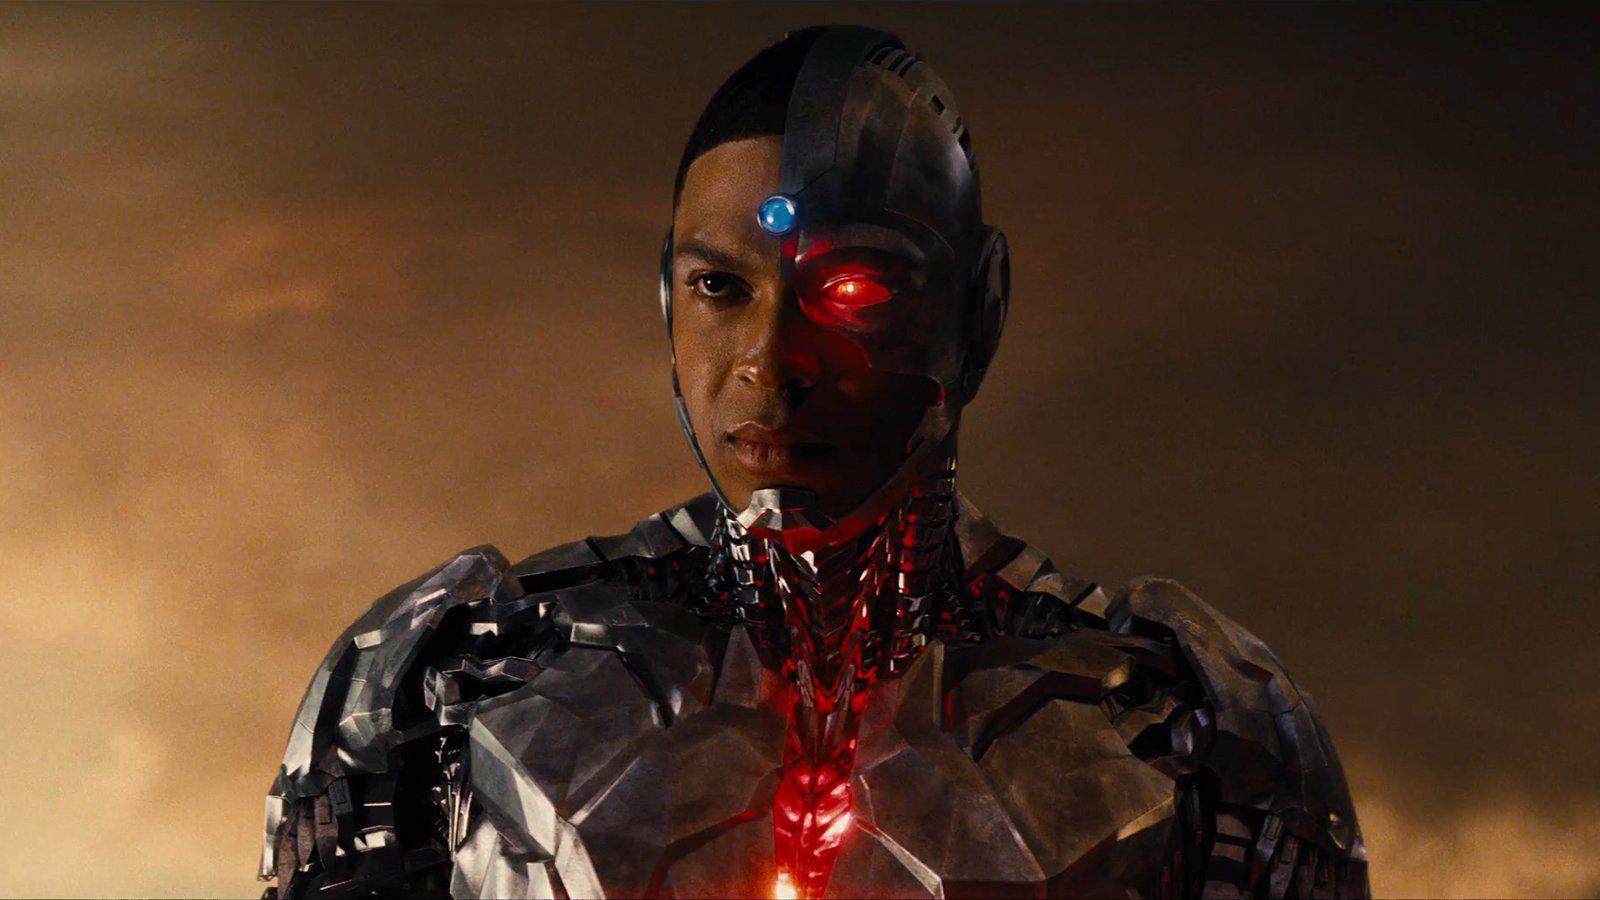 Justice League 2017 Cyborg Wallpaper and Background Imagex900